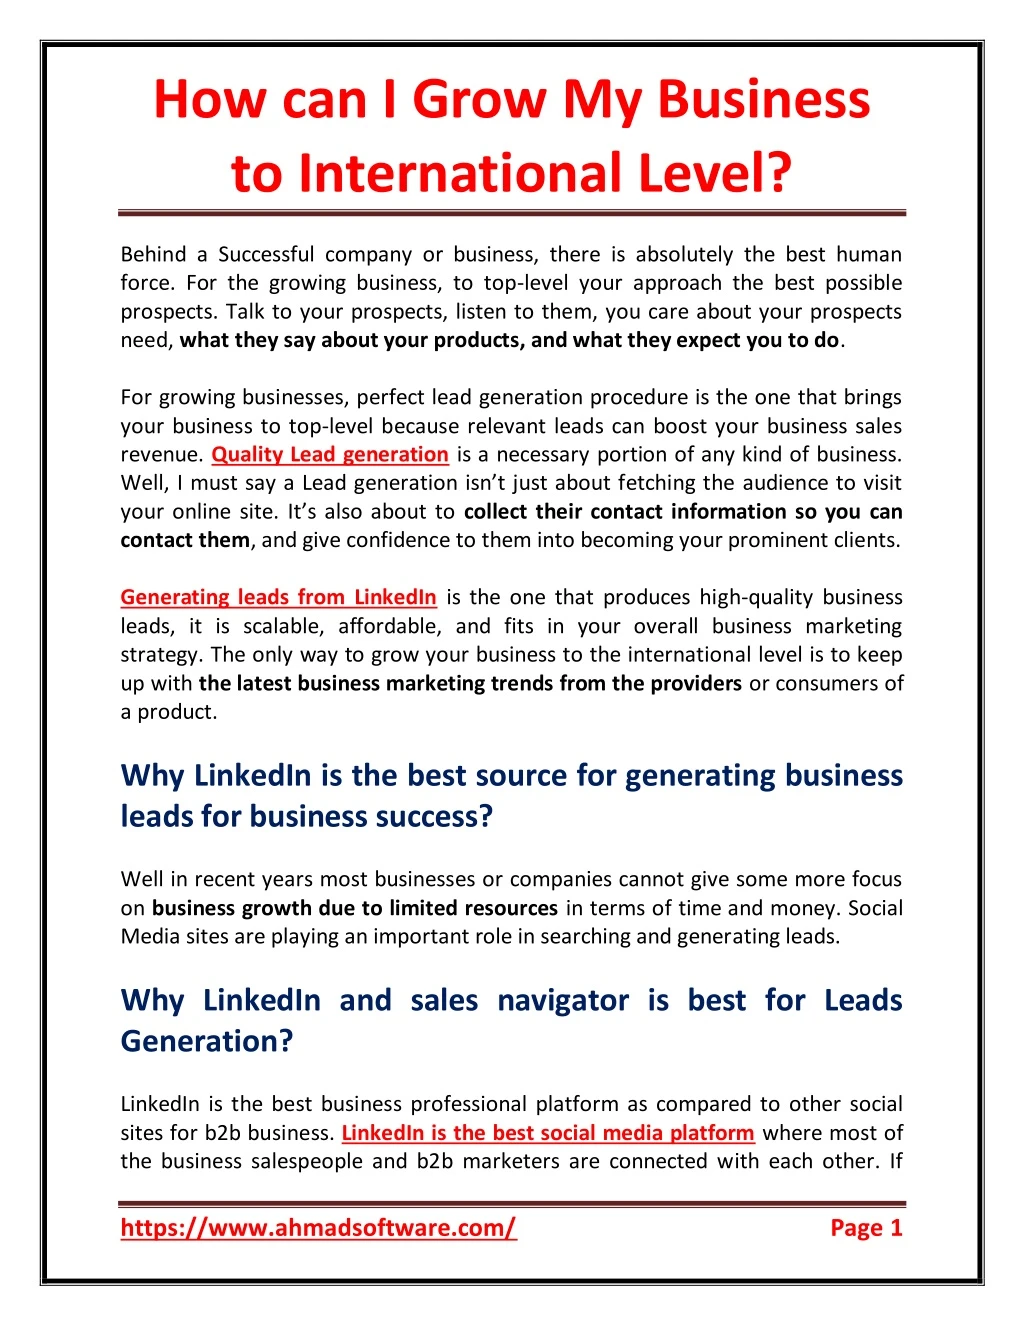 how can i grow my business to international level